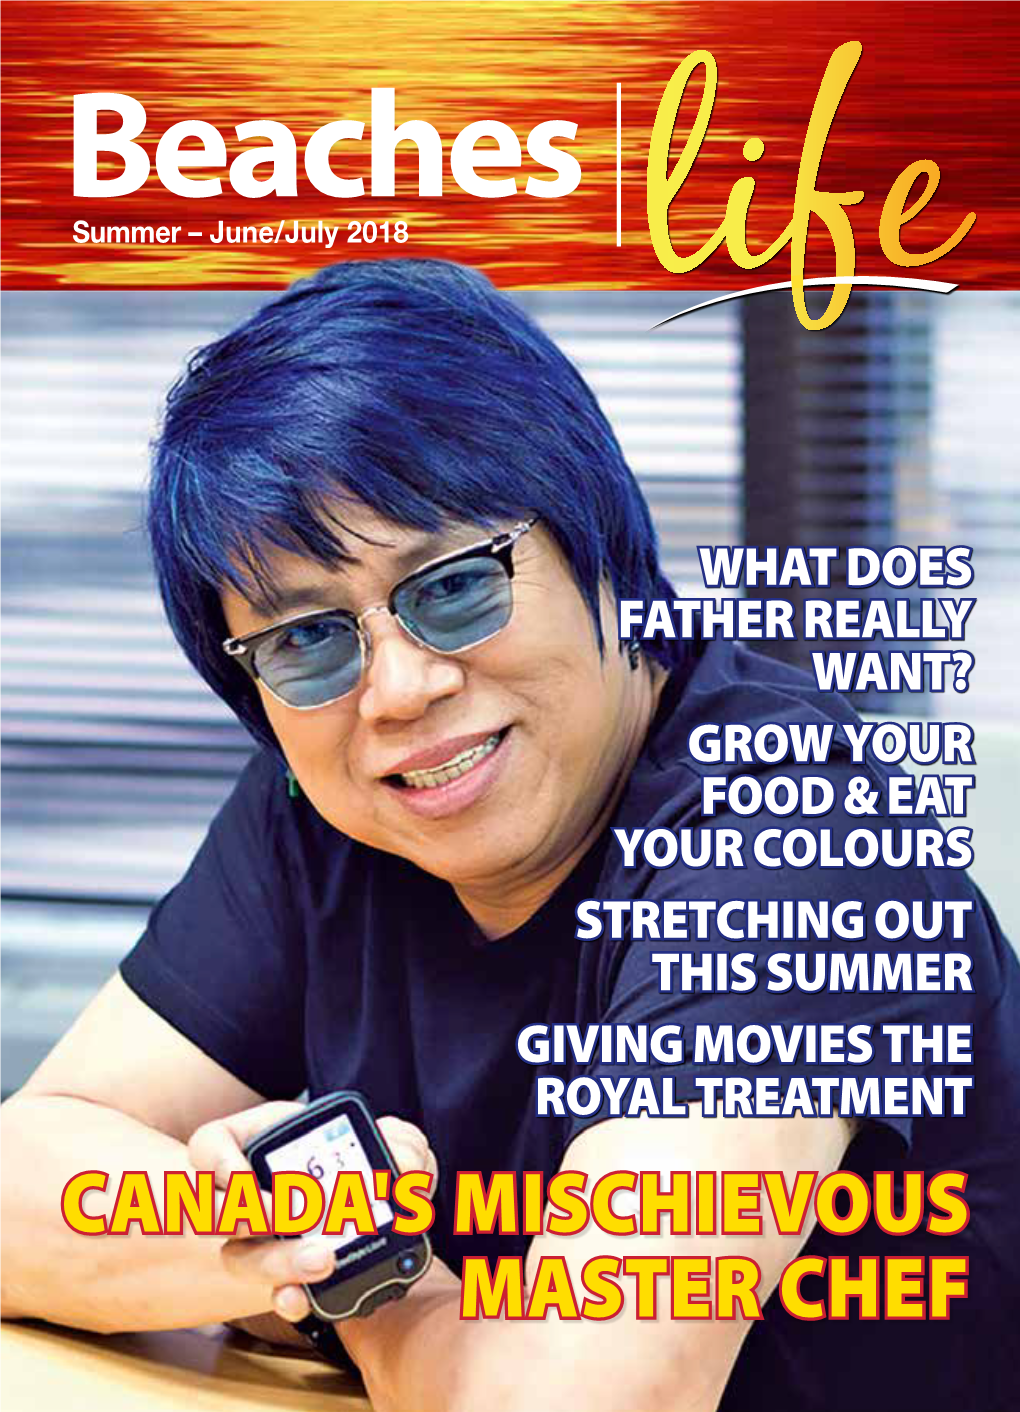 Canada's Mischievous Master Chef Your Beach Bbq Experts Cover Story Masterchef Canada’S 5 Demon Chef Alvin Leung